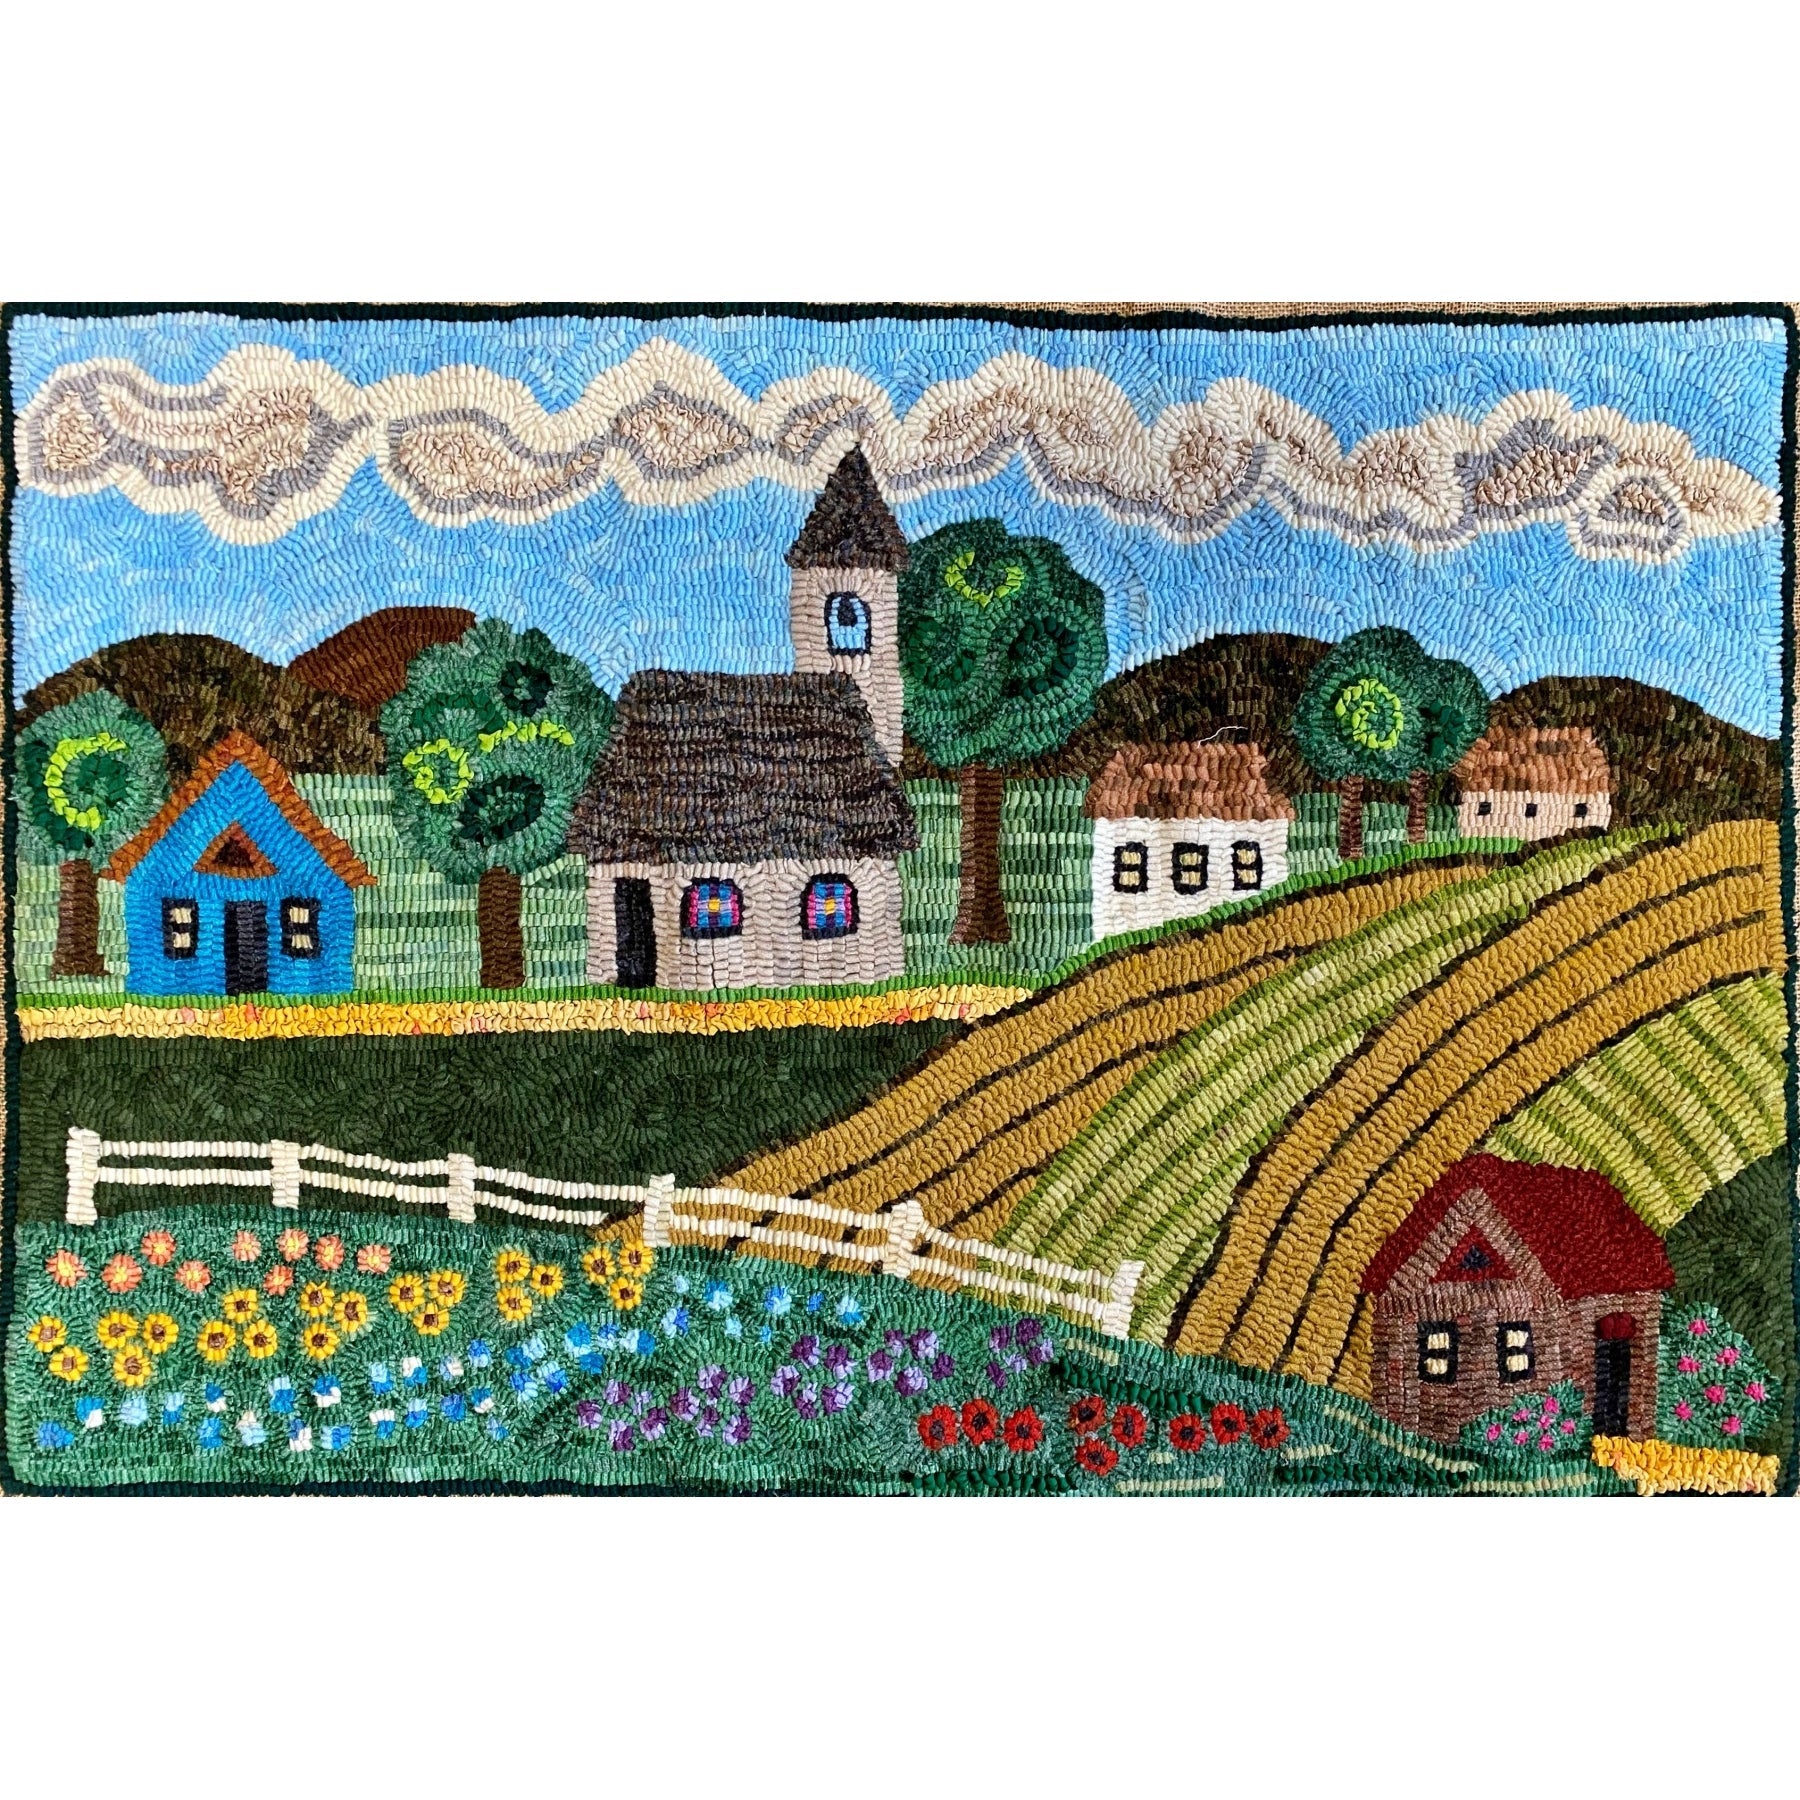 A Country Village, rug hooked by Svetlana Spencer